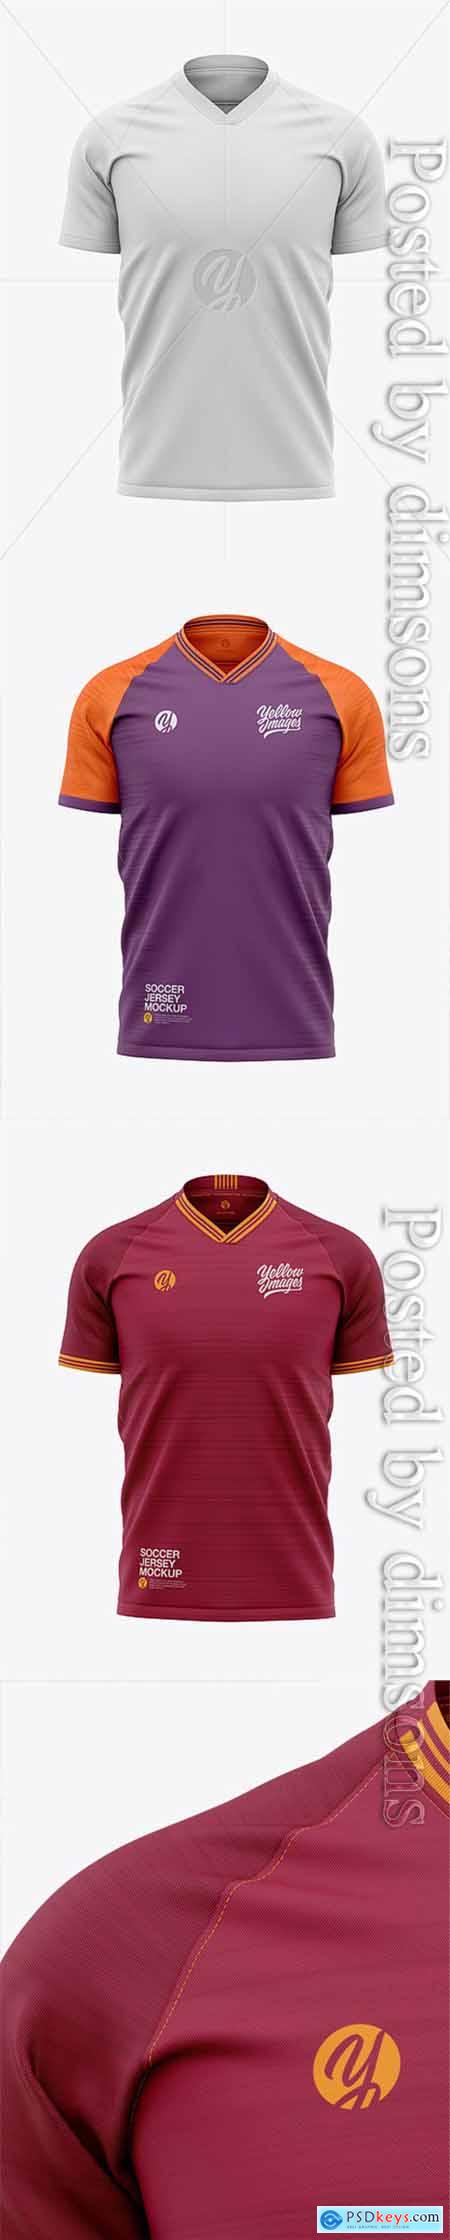 Download 23+ Soccer Bib Mockup Front View Pictures Yellowimages ...